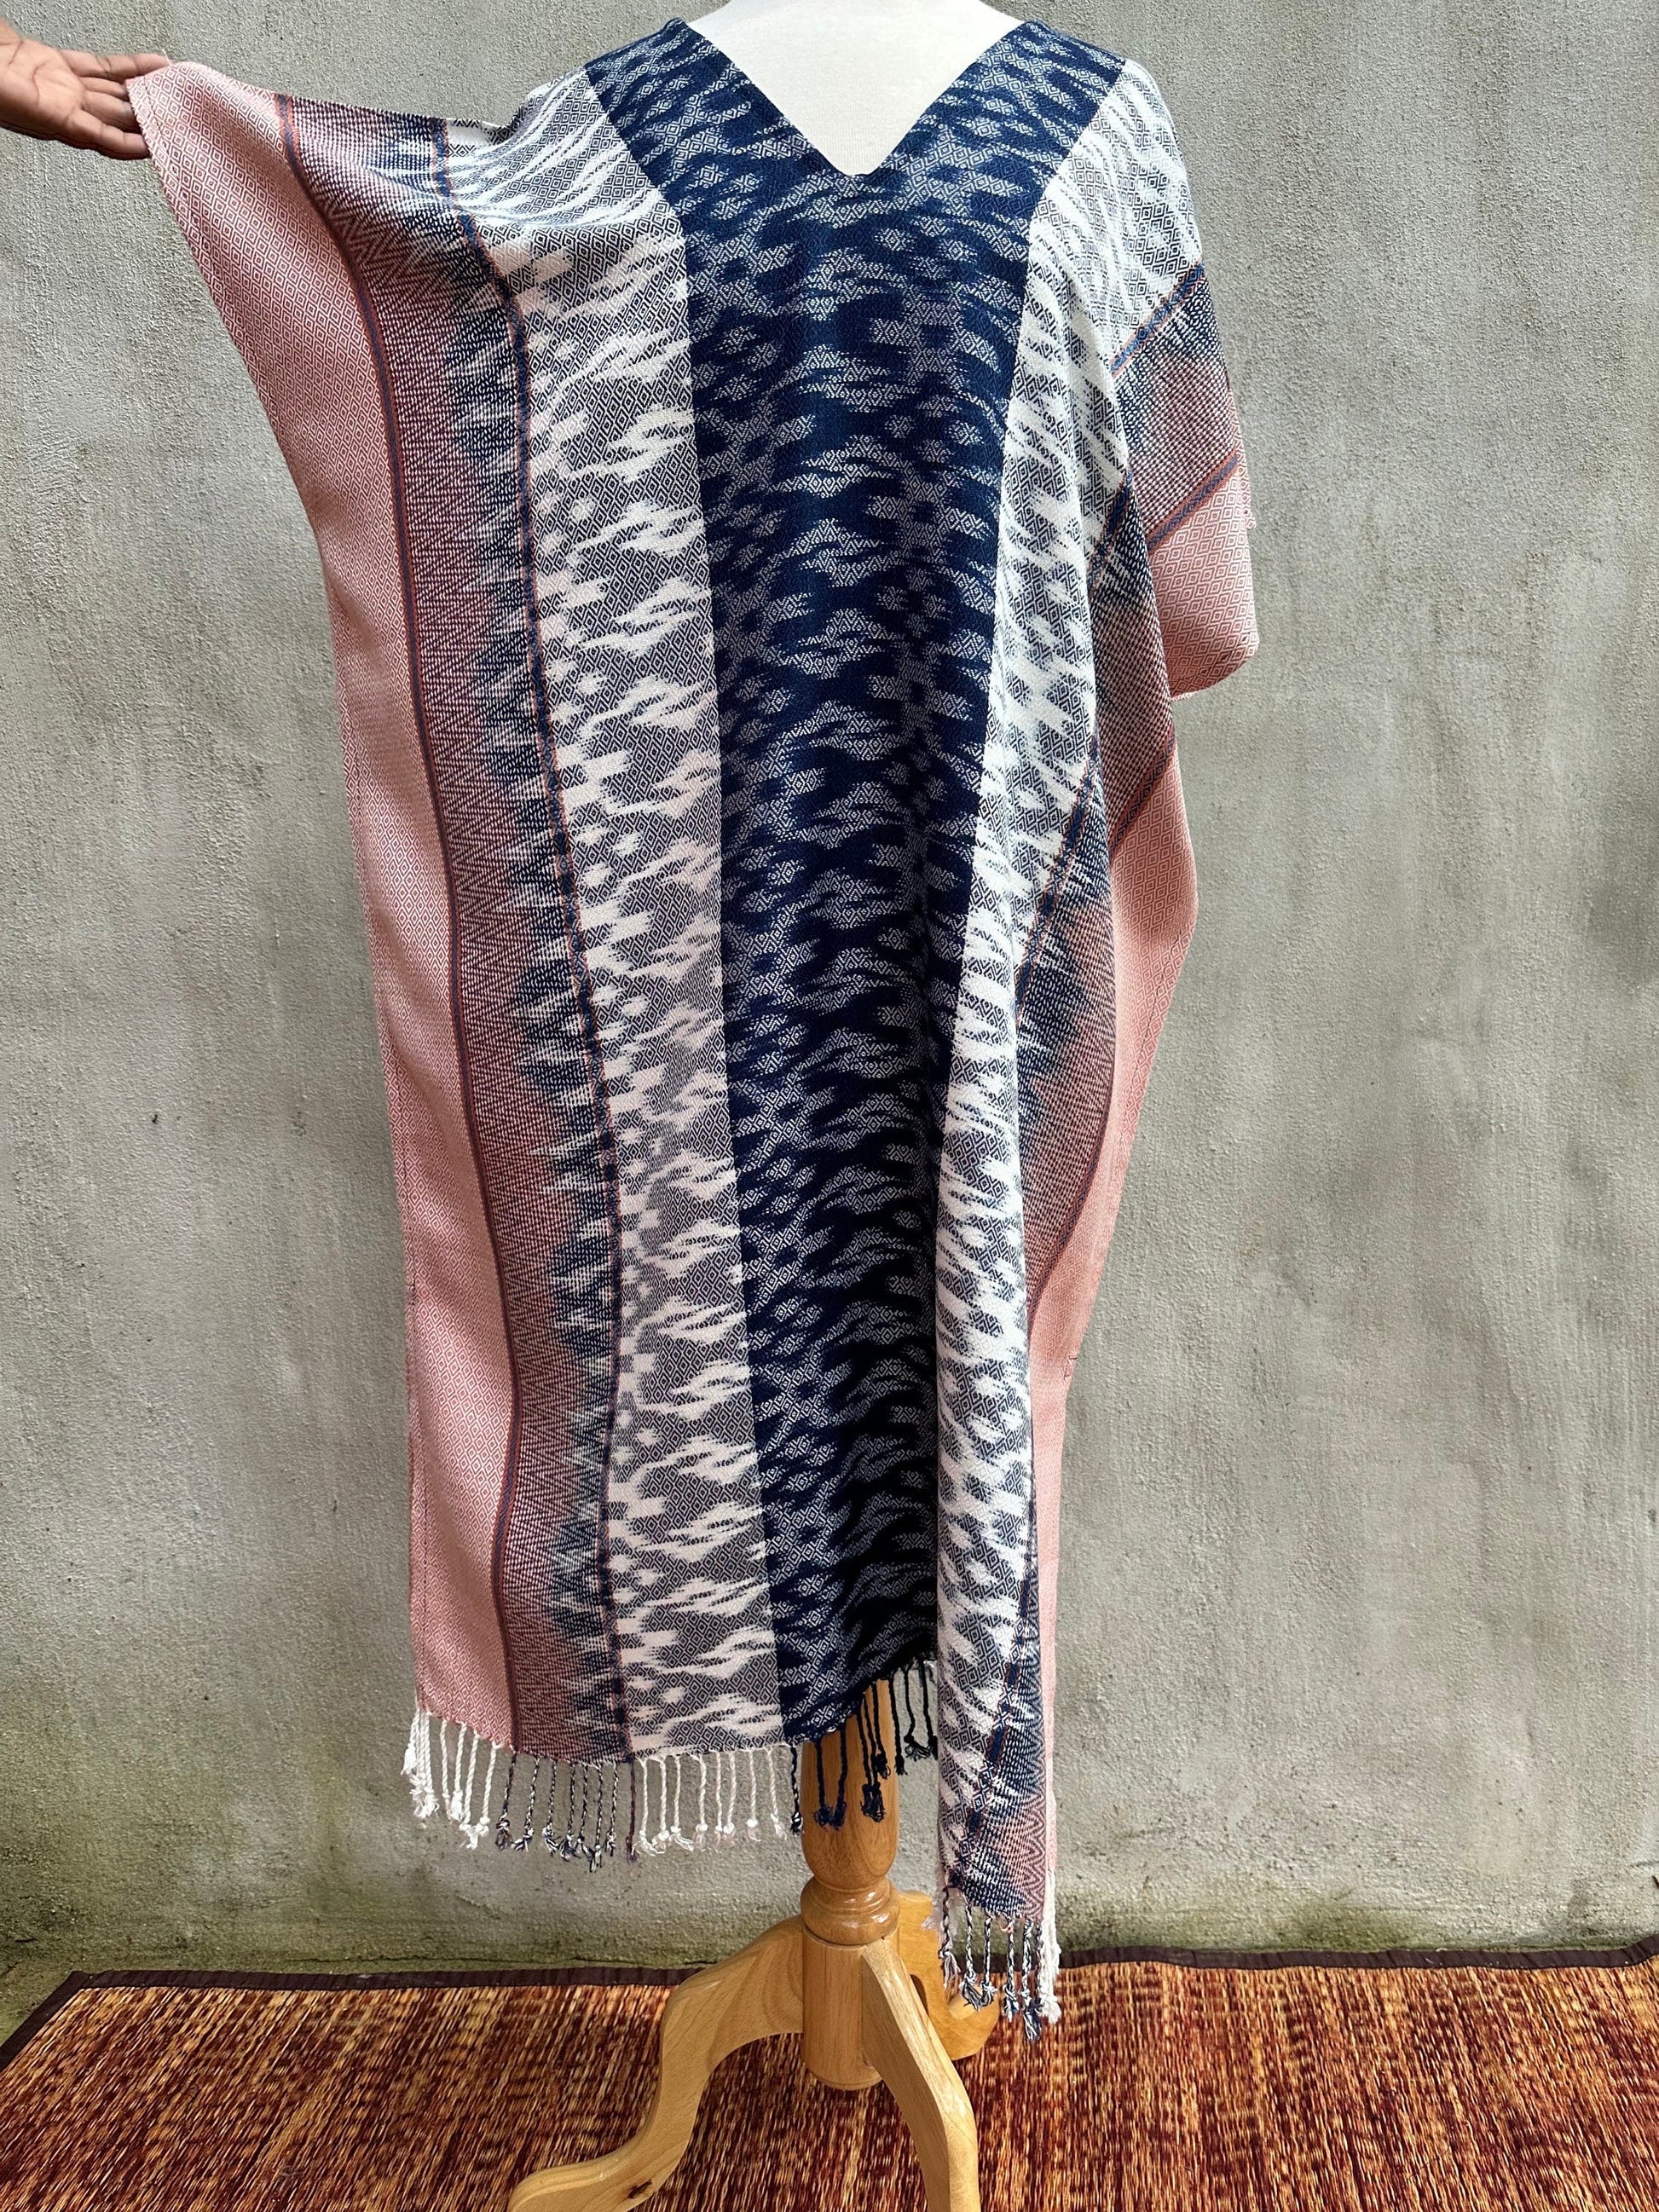 MALA handworks  Ikat Hand Woven Pattern Kaftan in Indigo Blue with Pink and White